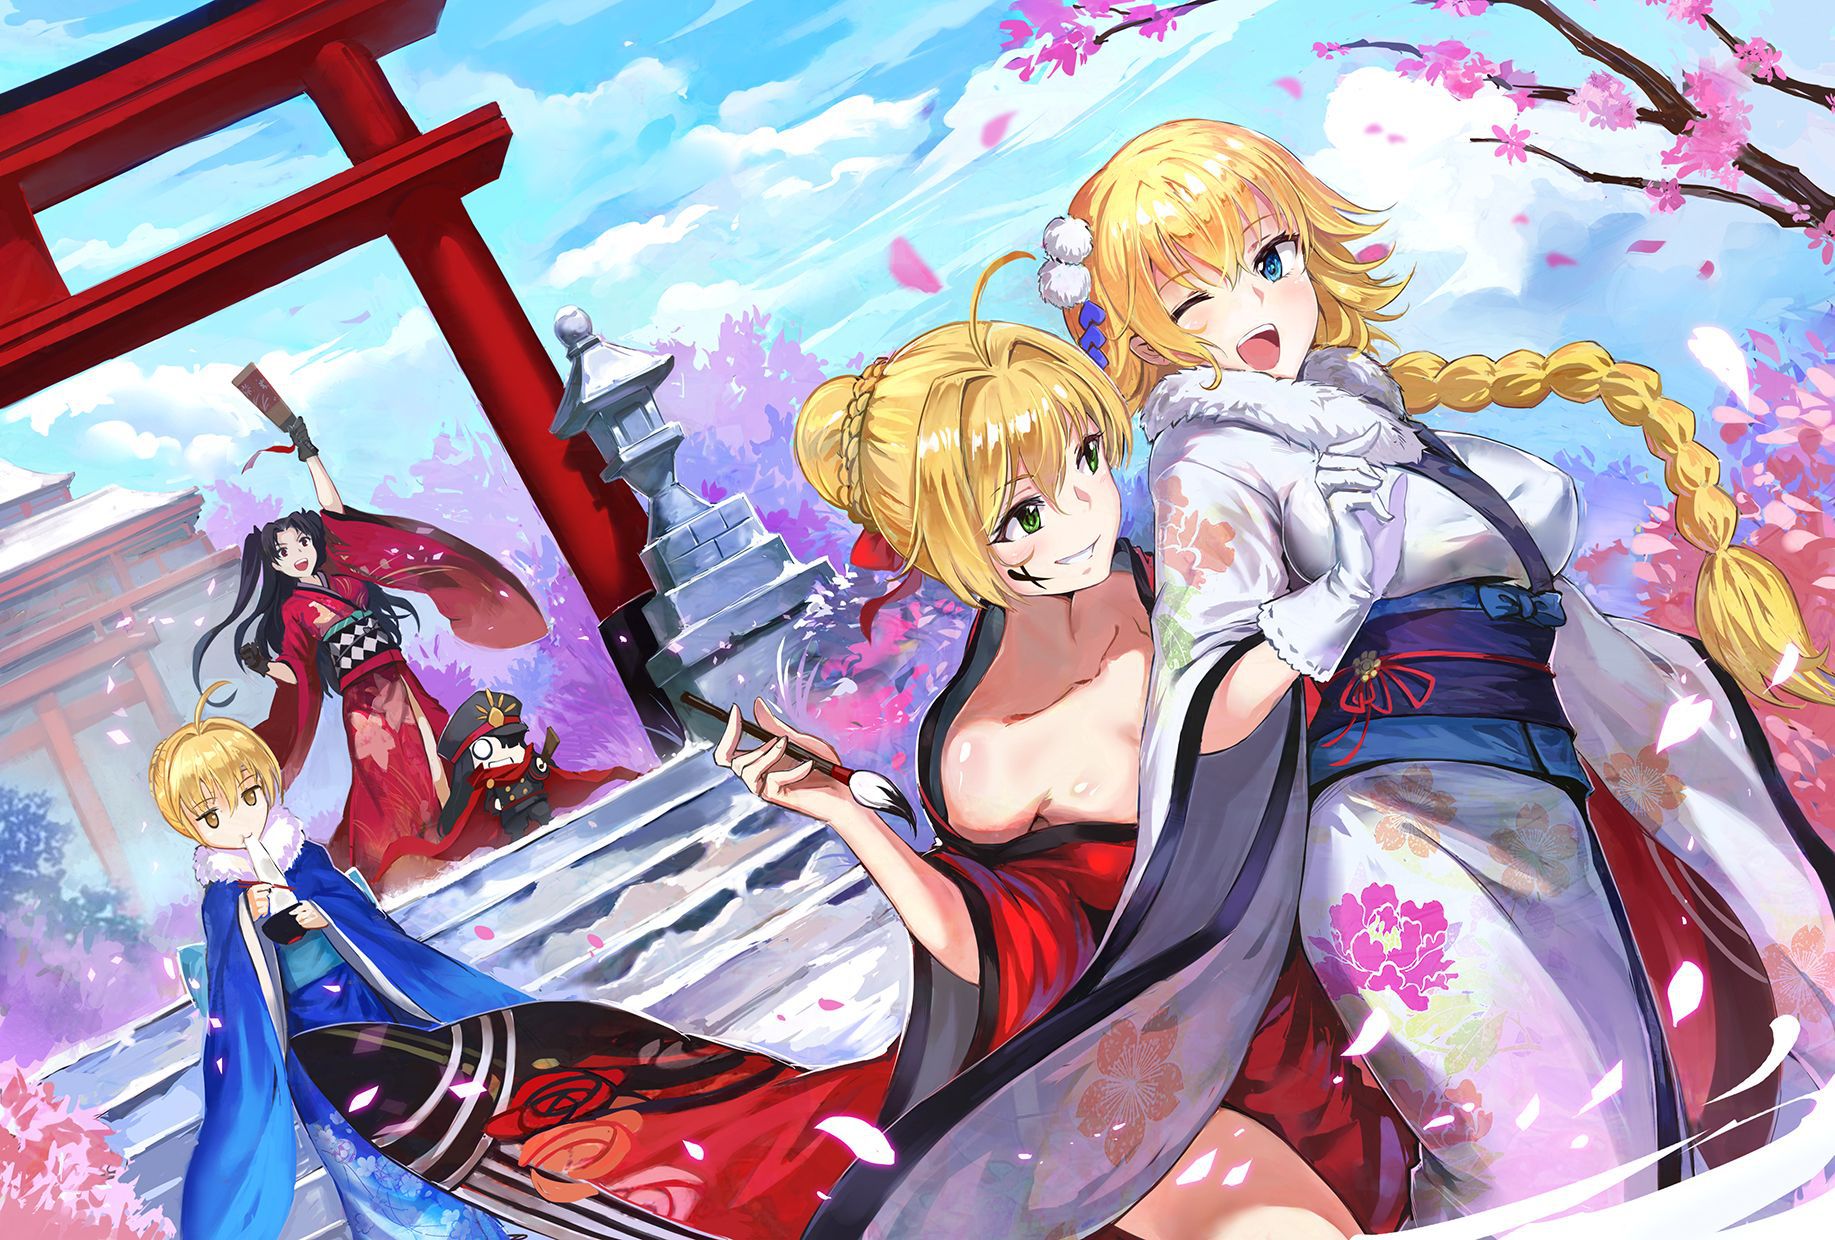 [Secondary ZIP] is about to start anime 100 pieces of cute image summary of Nero Claudius so soon 14